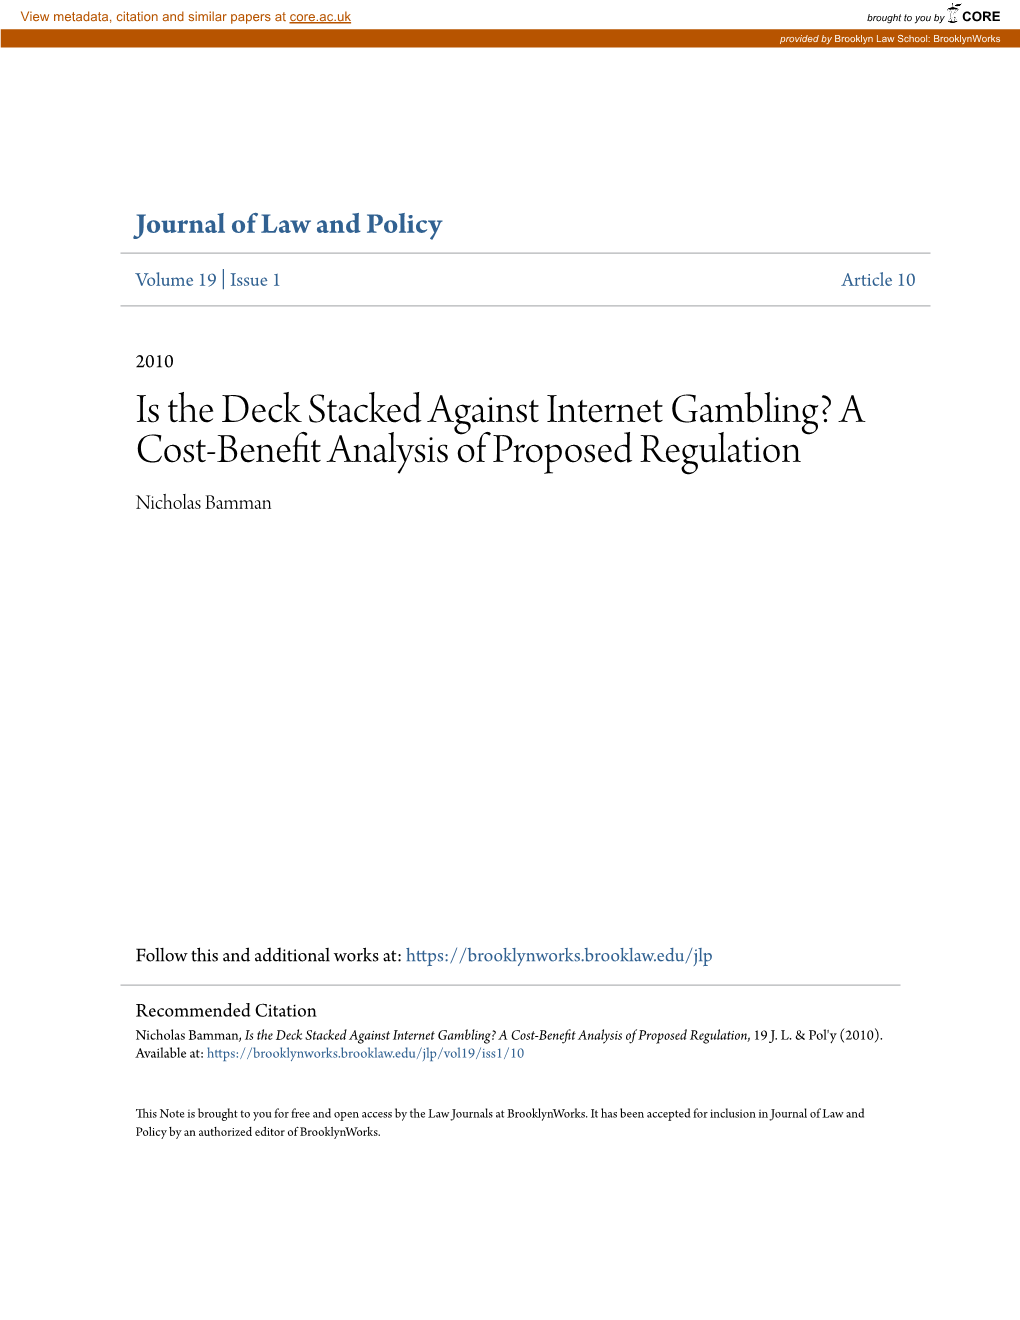 Is the Deck Stacked Against Internet Gambling? a Cost-Benefit Analysis of Proposed Regulation Nicholas Bamman